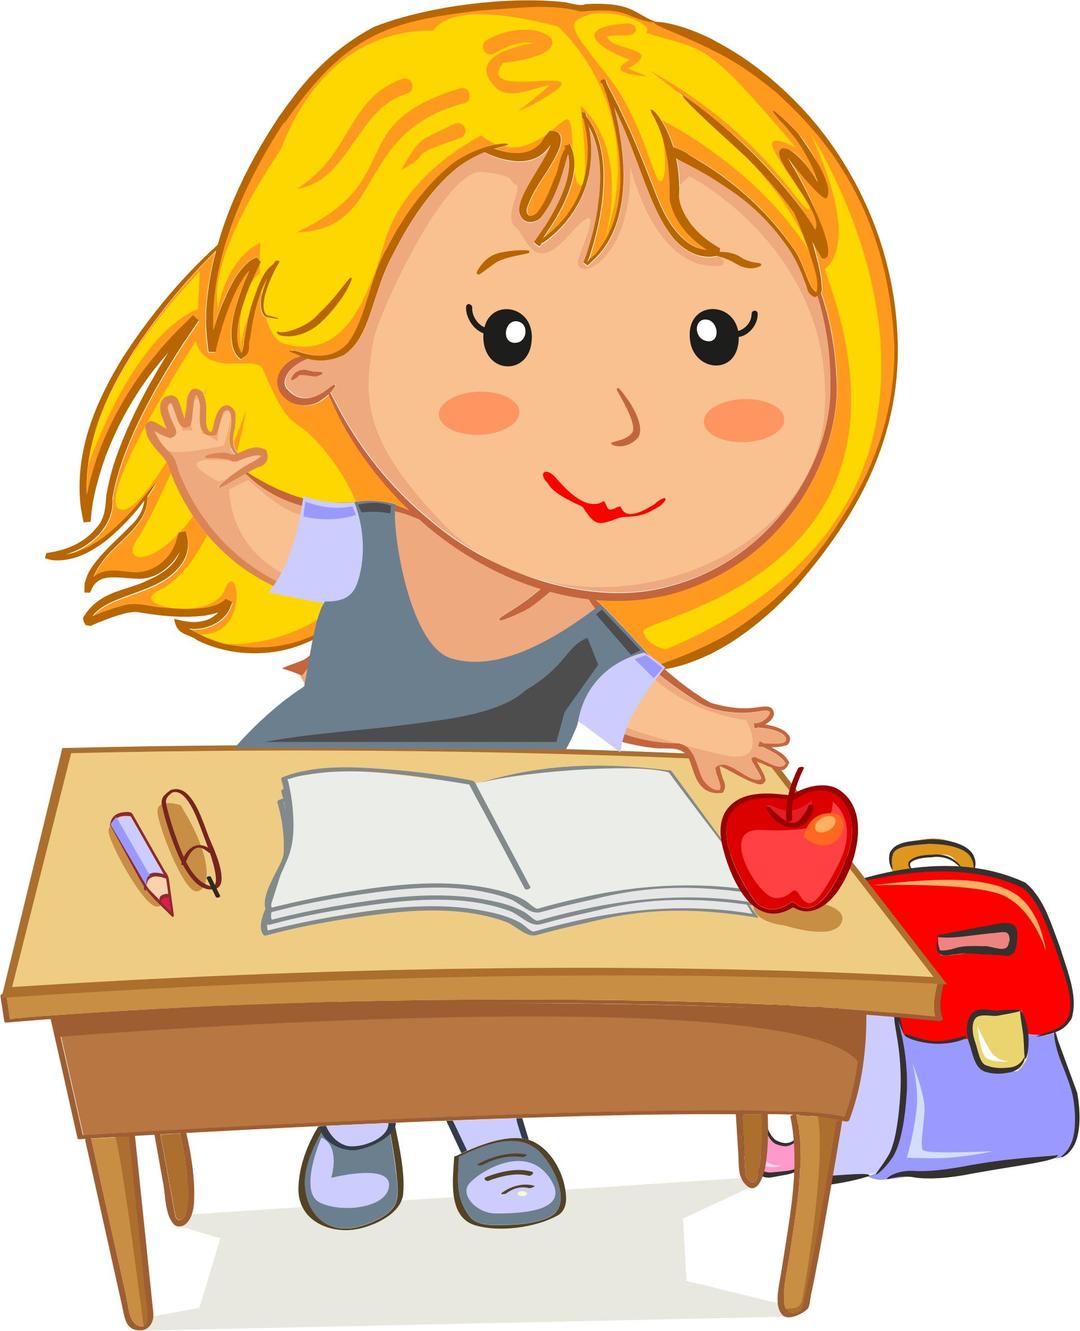 Blonde Girl Raising Her Hand Sitting At Her Desk In School png transparent